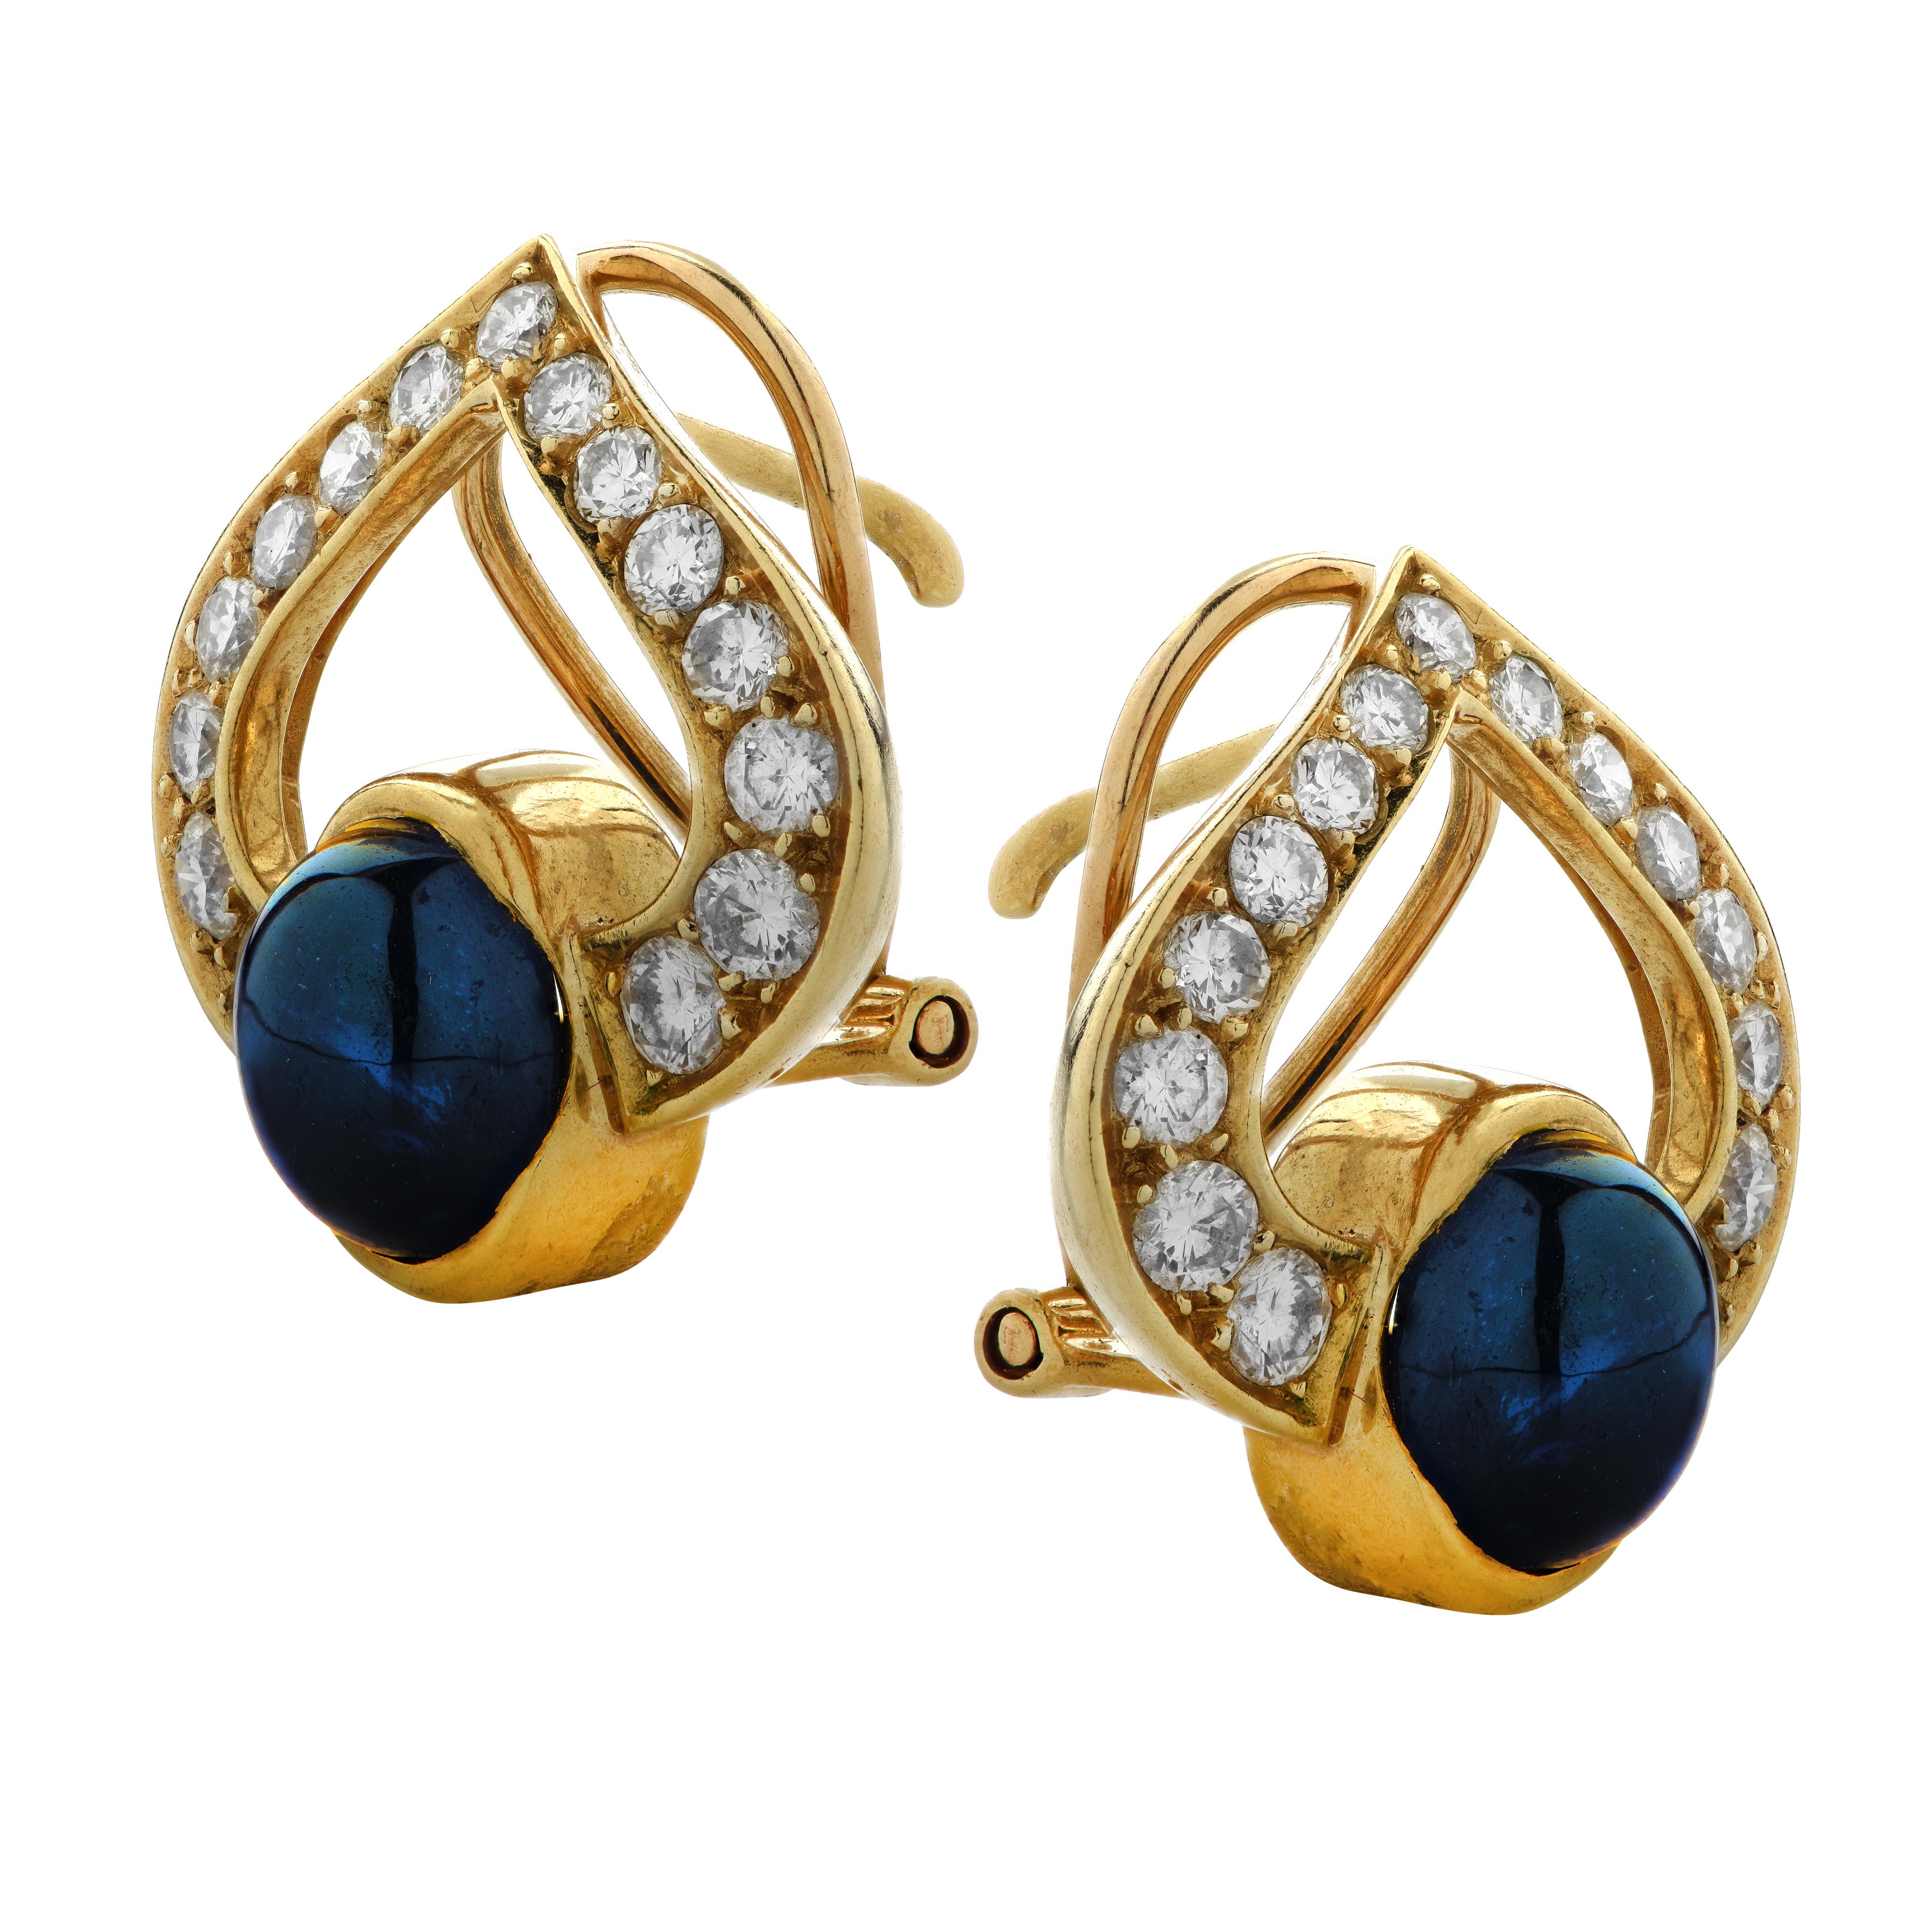 Delightful earrings crafted in France in 18 Karat yellow gold, featuring 30 round brilliant cut diamonds weighing approximately 1.50 carats total, G color, VS clarity, and two oval Sapphire cabochons weighing approximately 5 carats total. Two